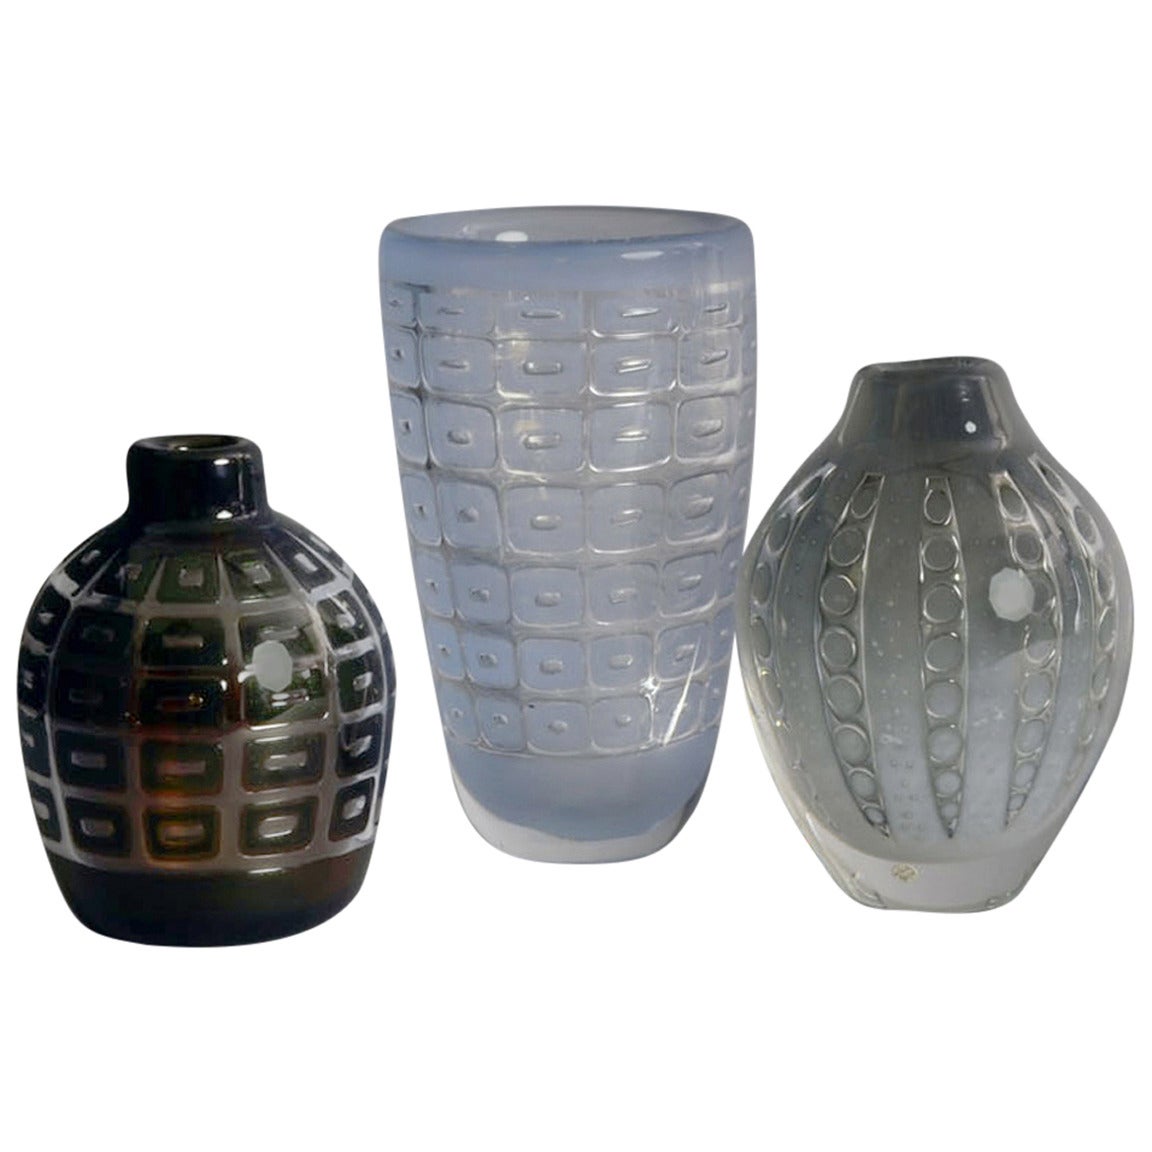 Three Ariel Vases by Edvin Ohrstrom for Orrefors For Sale